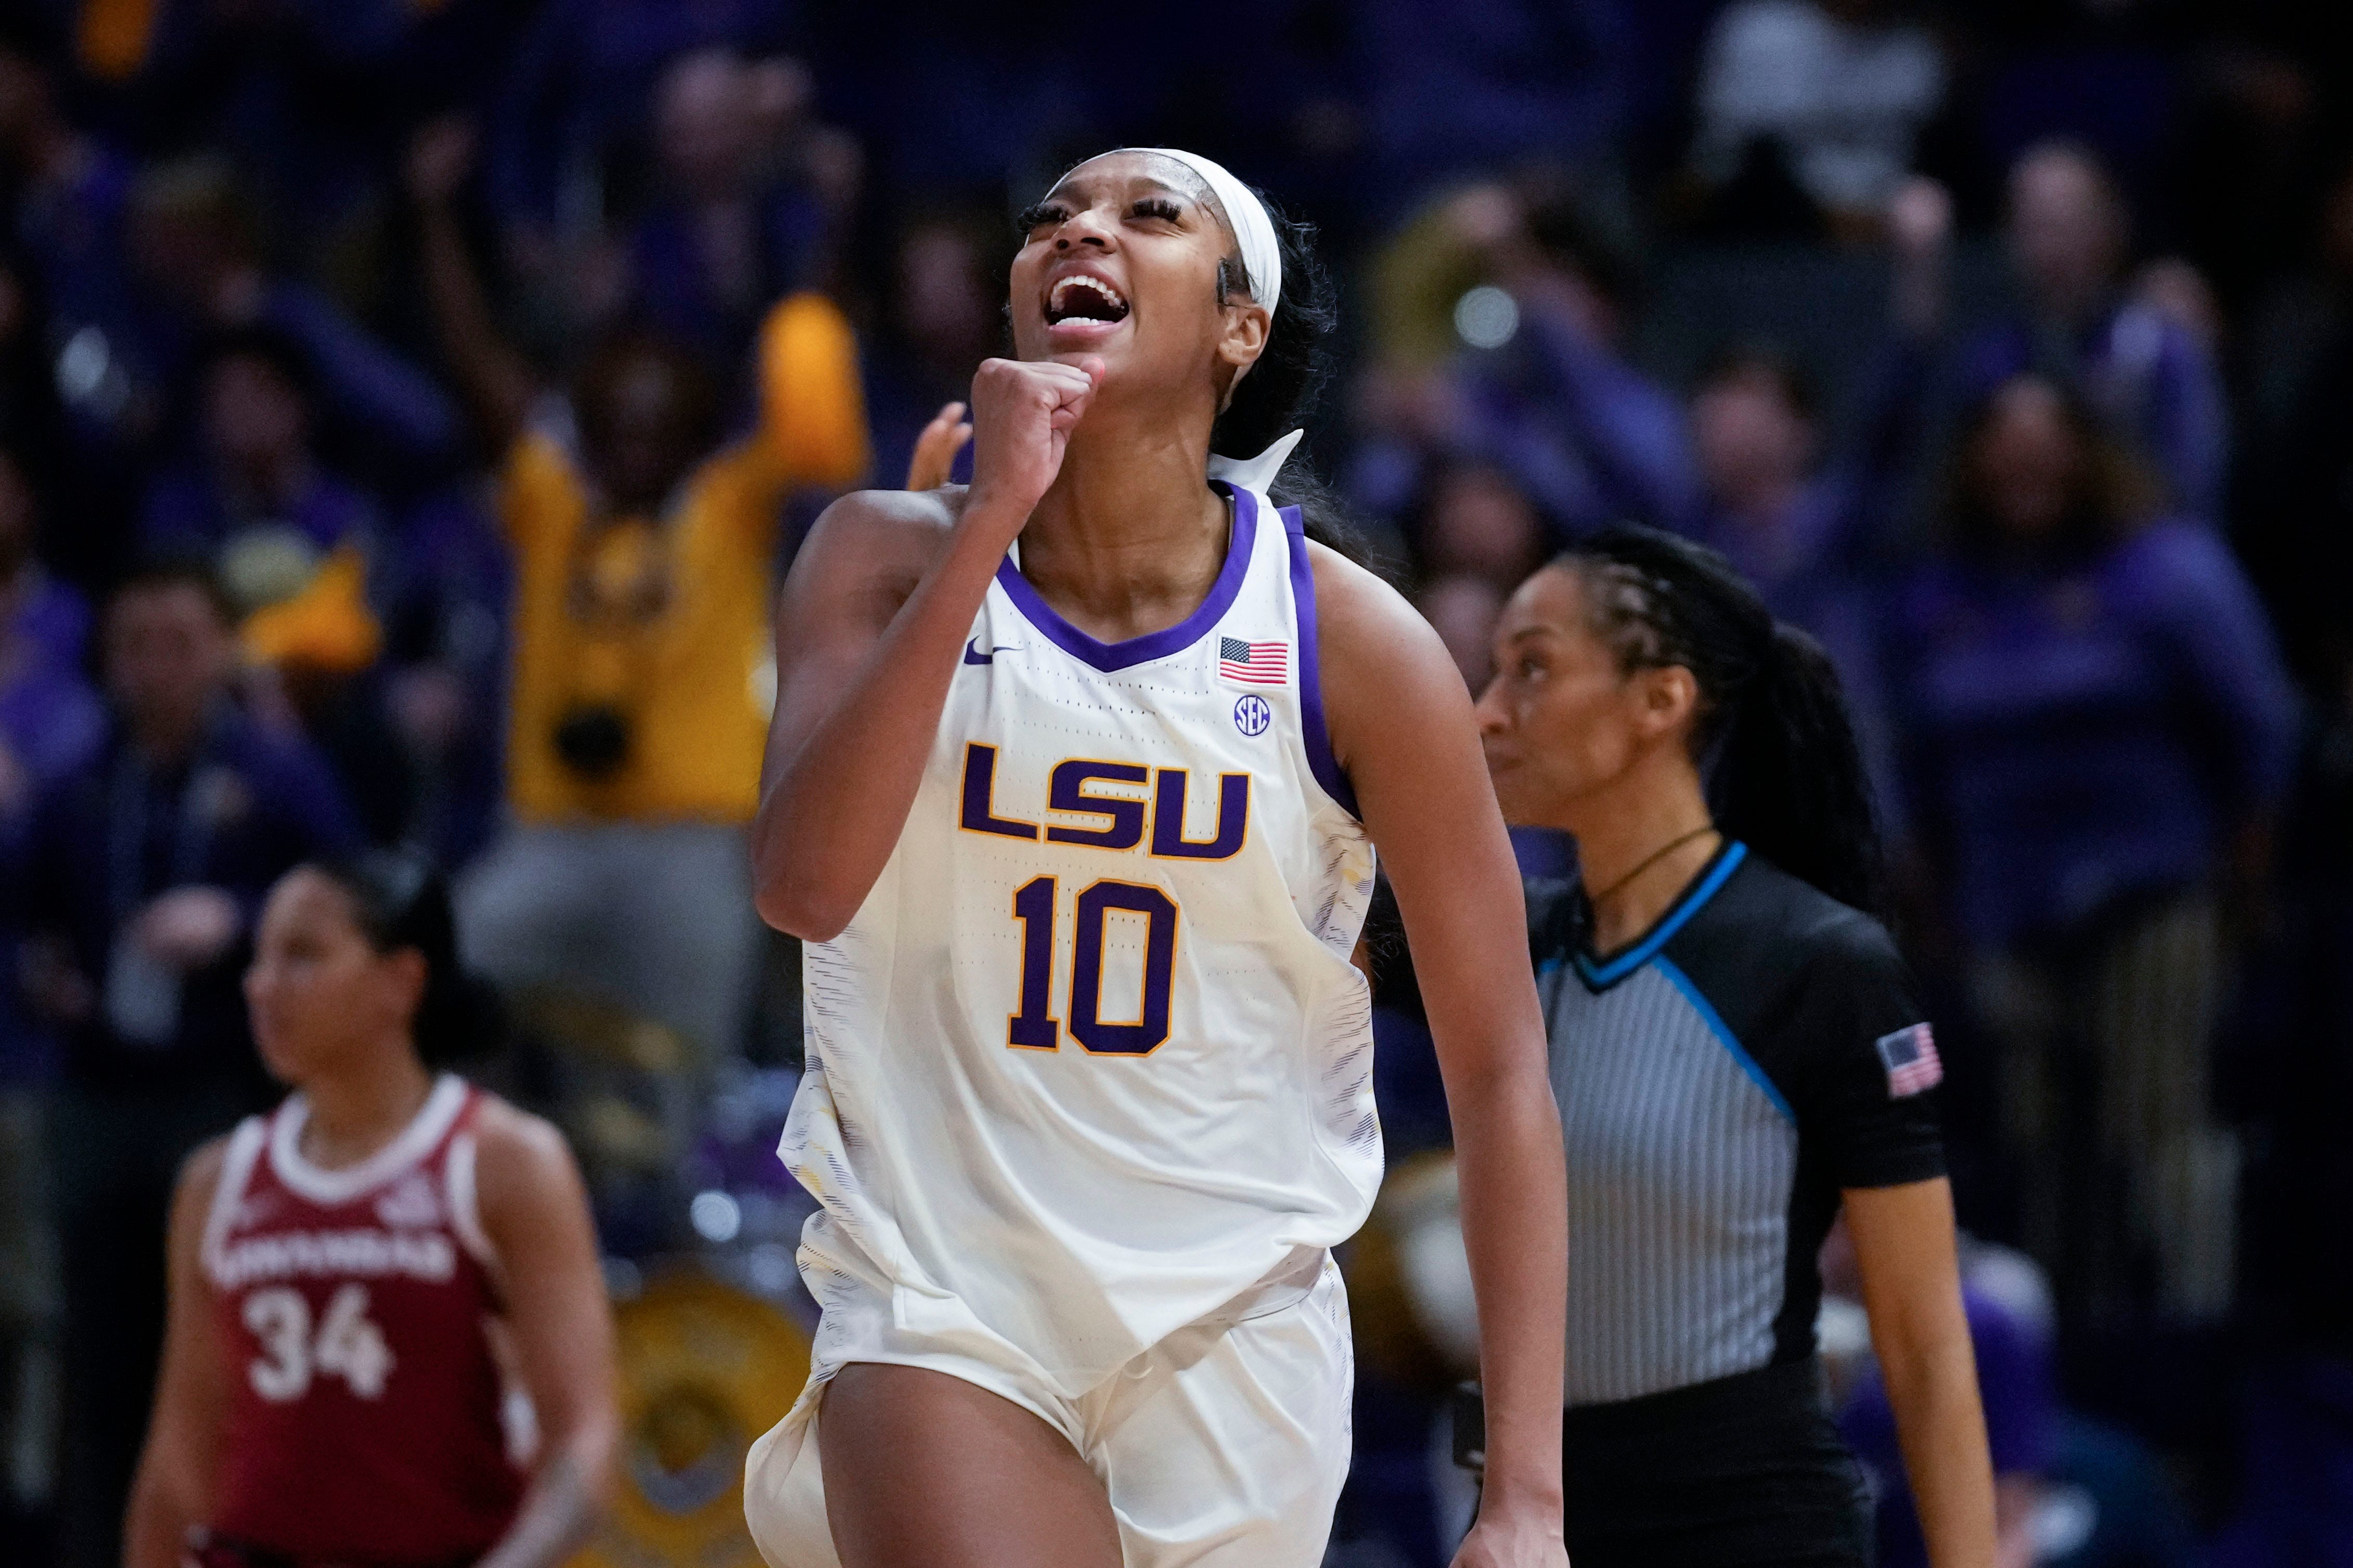 LSU forward Angel Reese (10) celebrates after a turnover in the second half an NCAA college basketball game against Arkansas in Baton Rouge, La., Thursday, Jan. 19, 2023. LSU won 79-76. (AP Photo/Gerald Herbert)